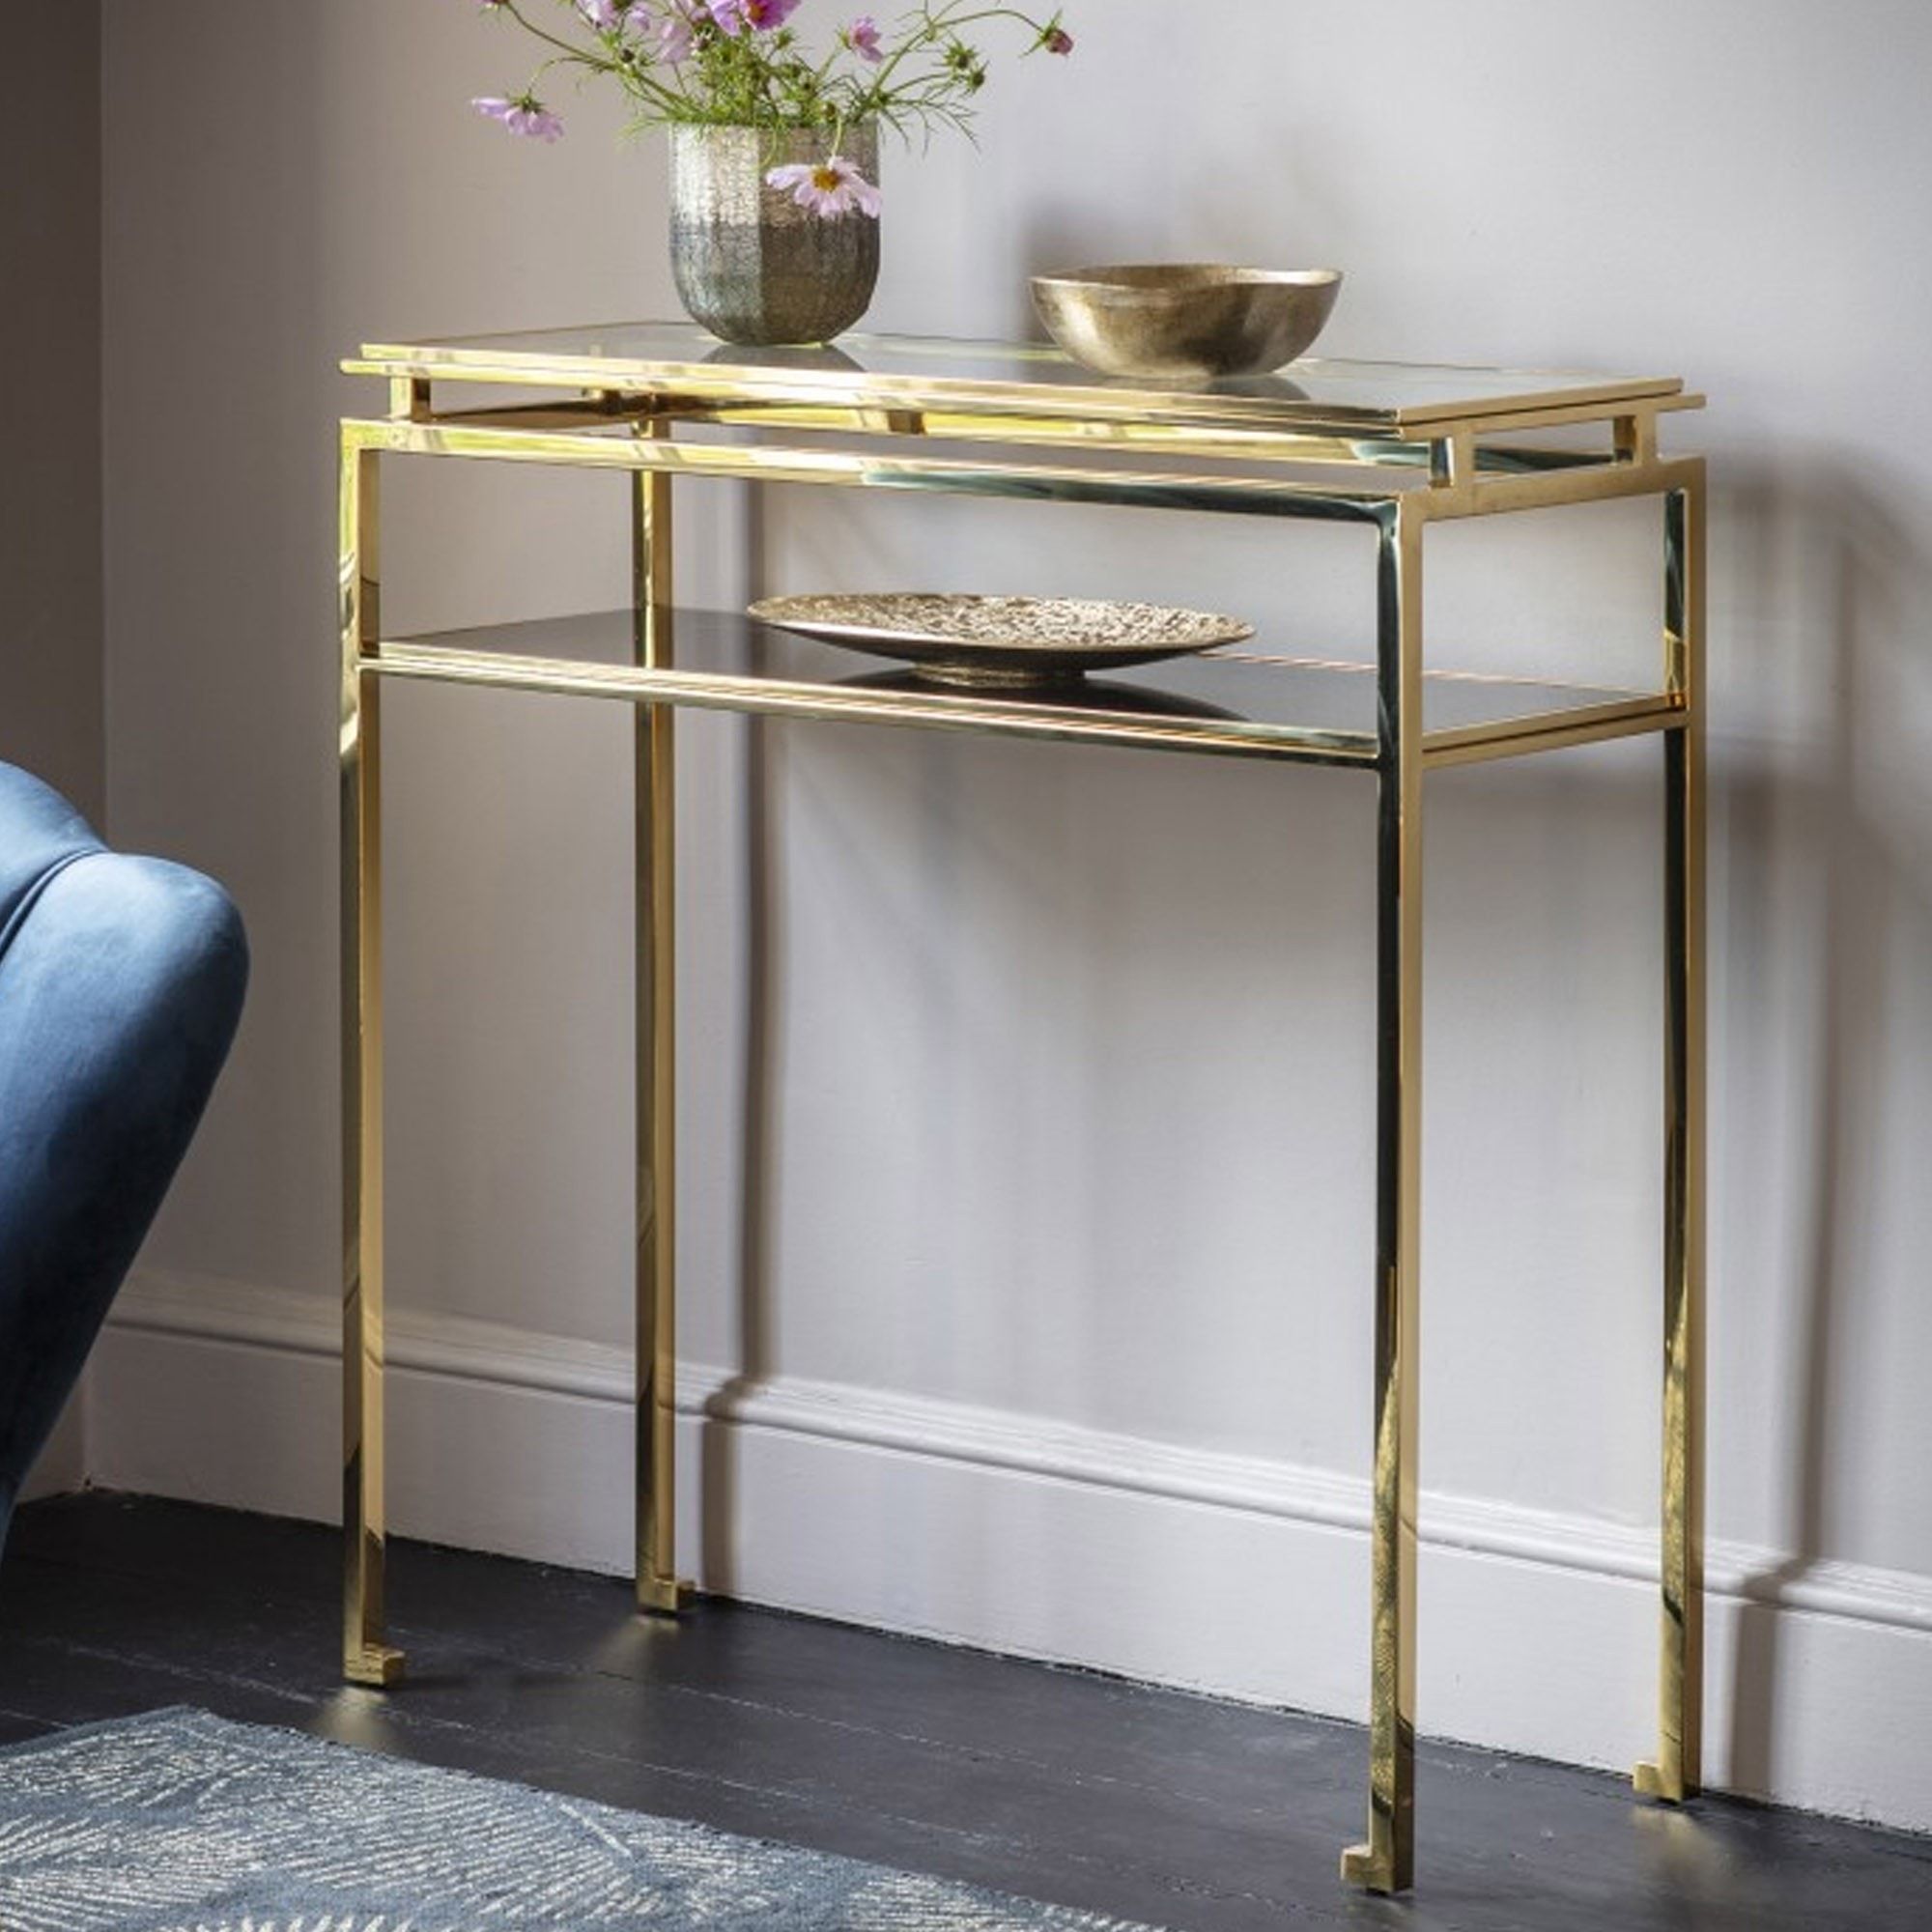 Cosenza Console Table Gold | Gold Console Table | Glass Console Table With Regard To Glass And Gold Oval Console Tables (View 2 of 20)